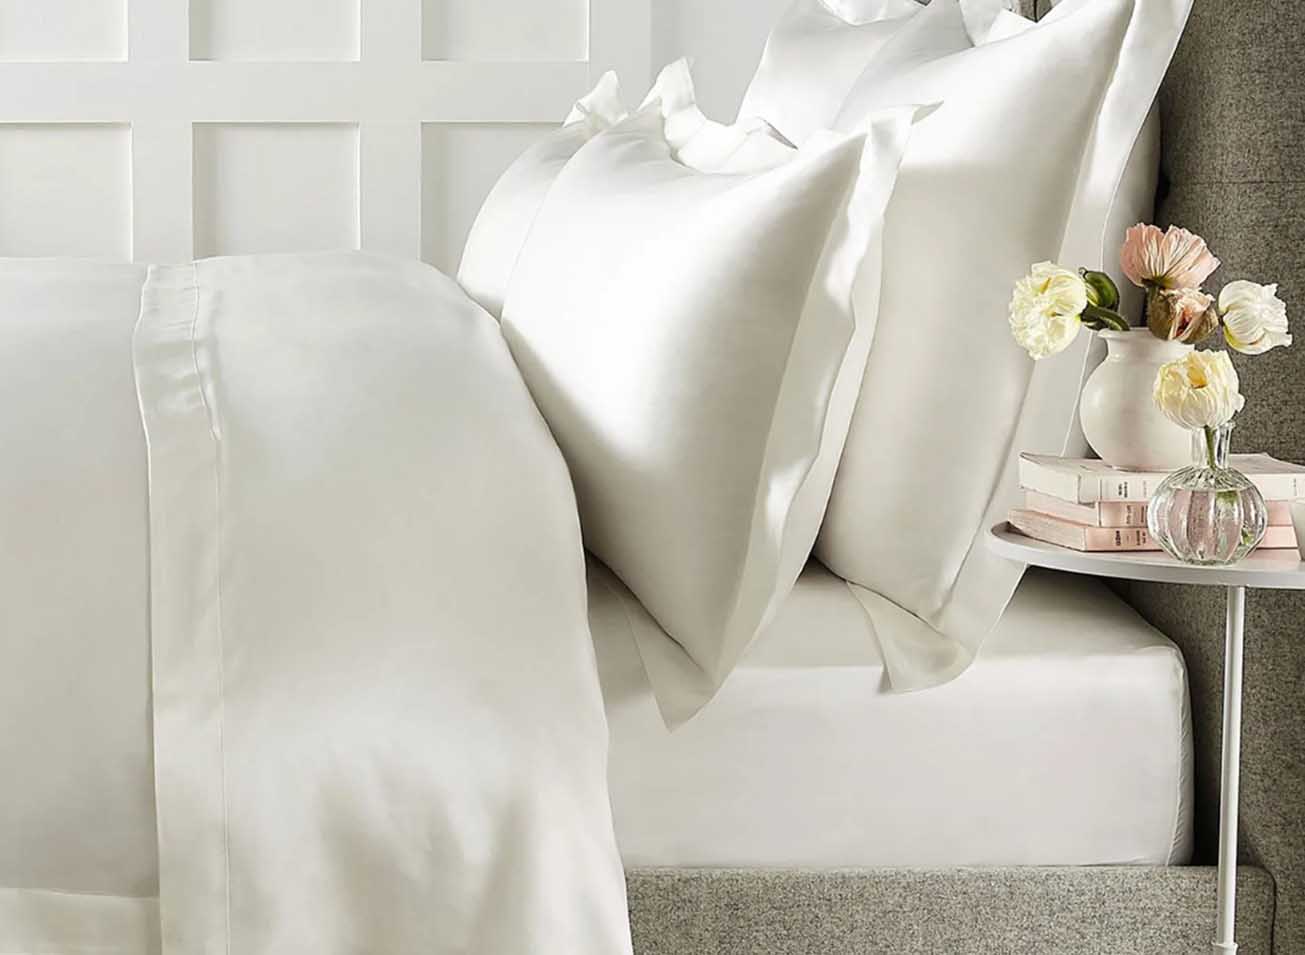 Gorgeous Selection: Silk Bedding Luxury Set, Creating a Dreamy Bedroom Experience!